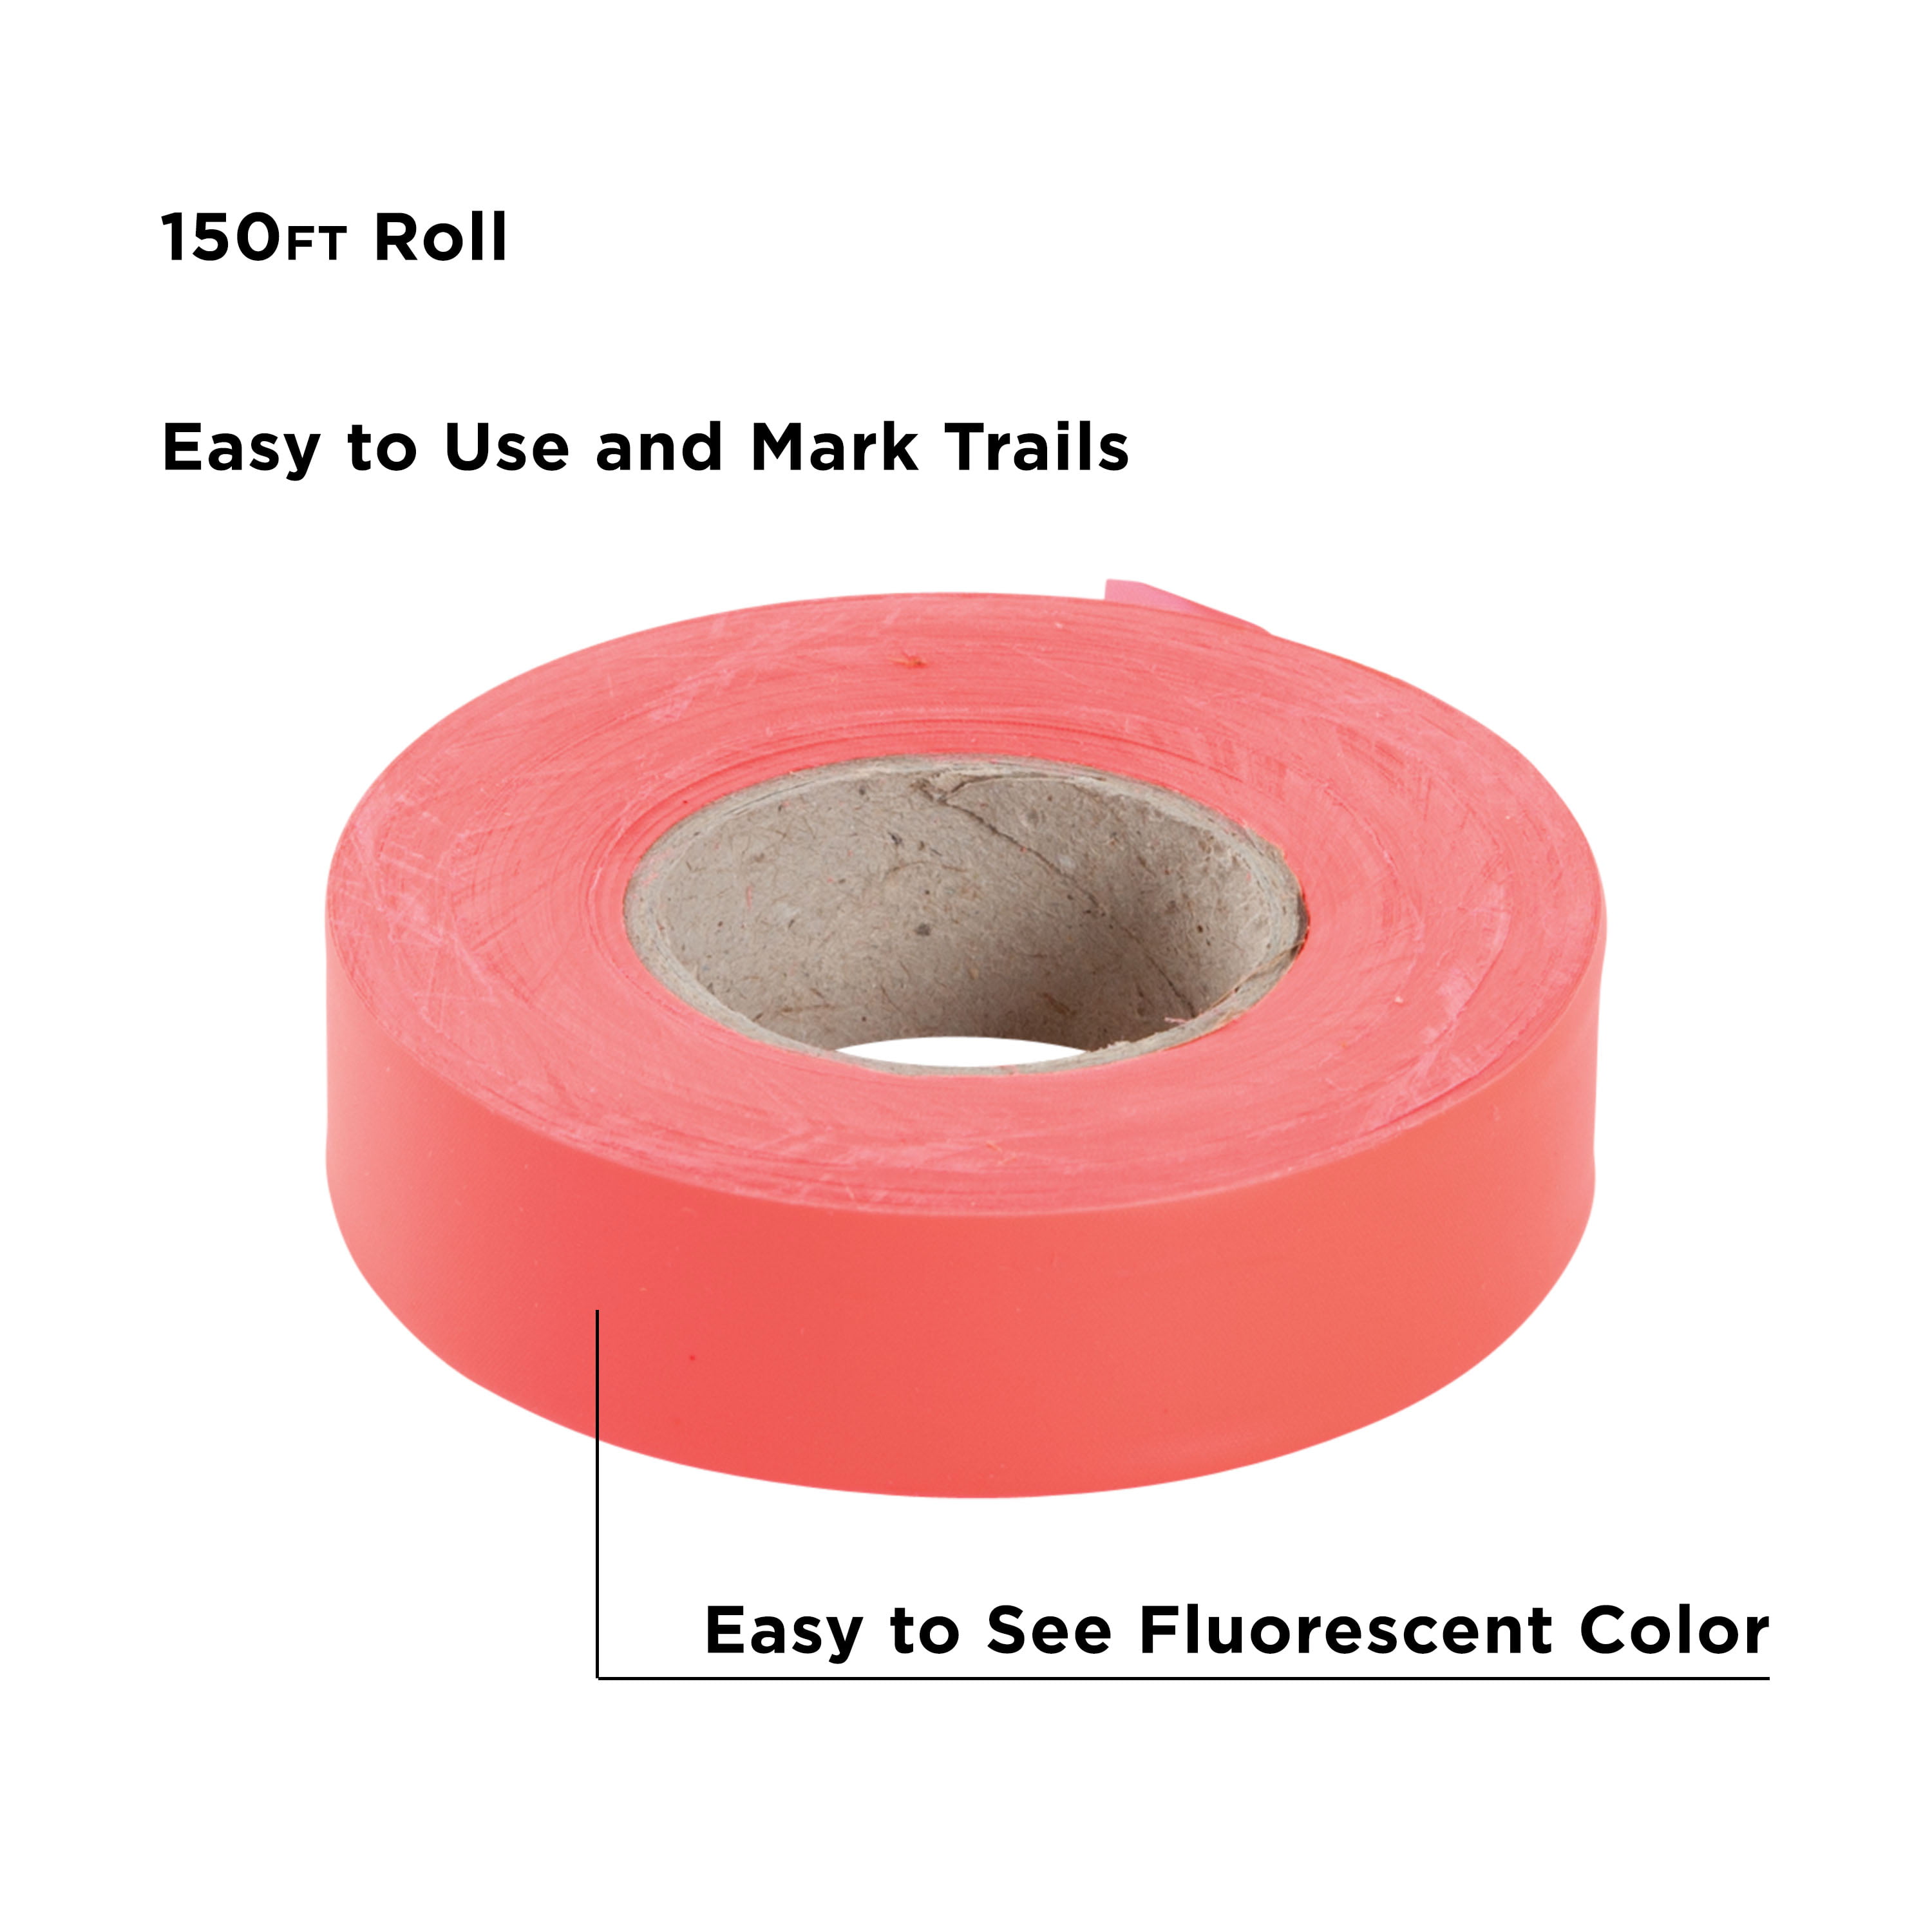 NEW ROLL OF ALLEN HI-VIS FLAGGING TAPE 150 FEET X 1 INCH  CARDED  FREE SHIPPING 